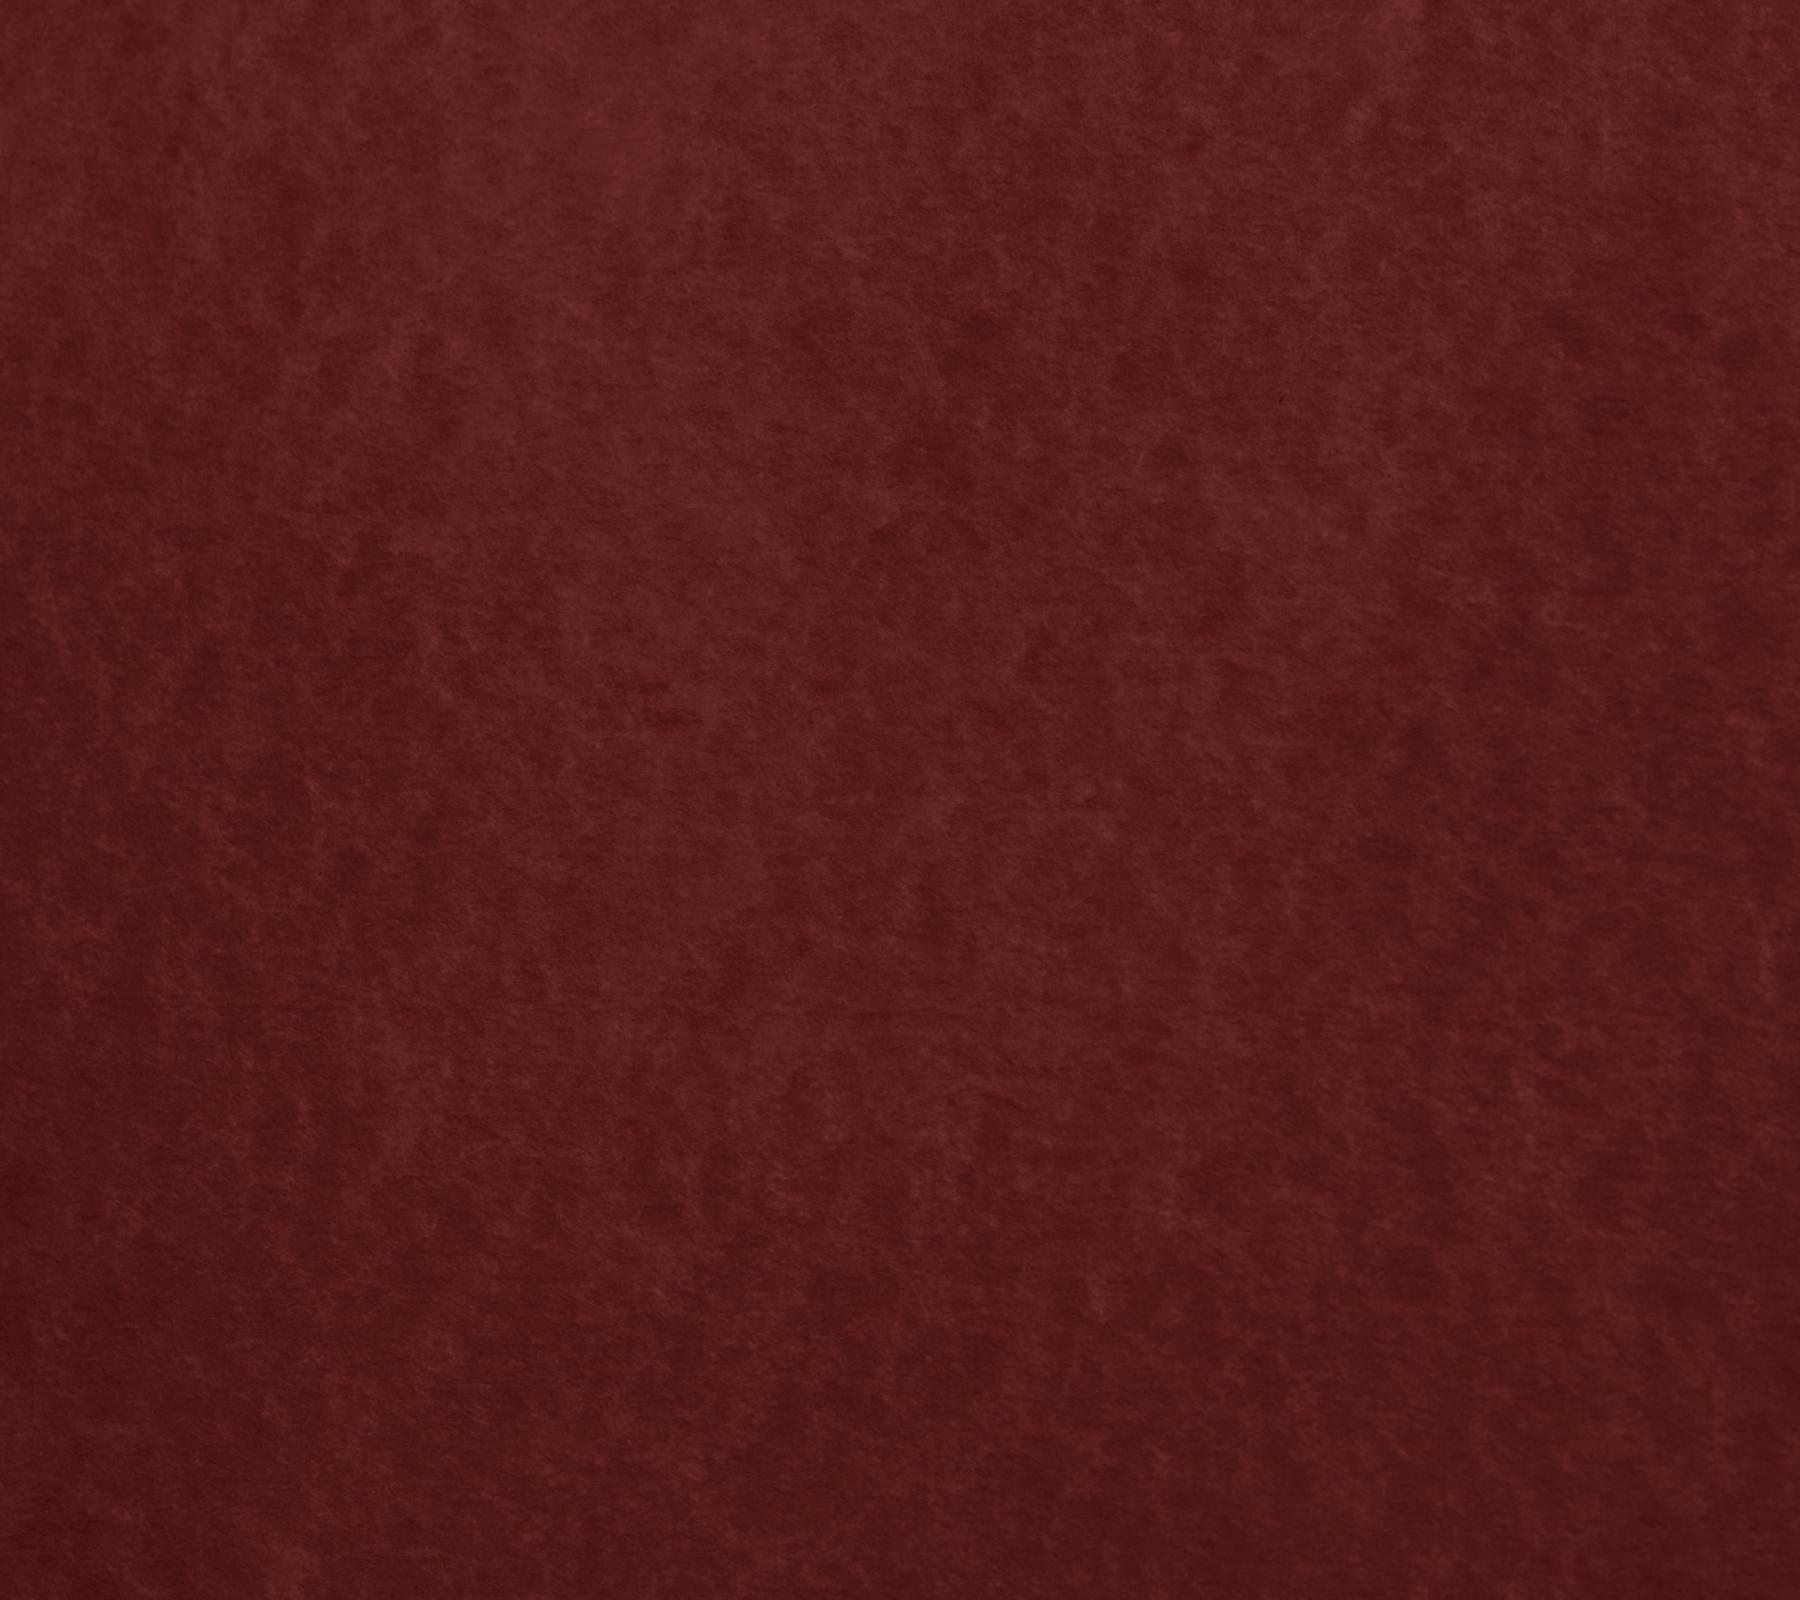 Free Maroon Parchment Paper Background 1800x1600 Background